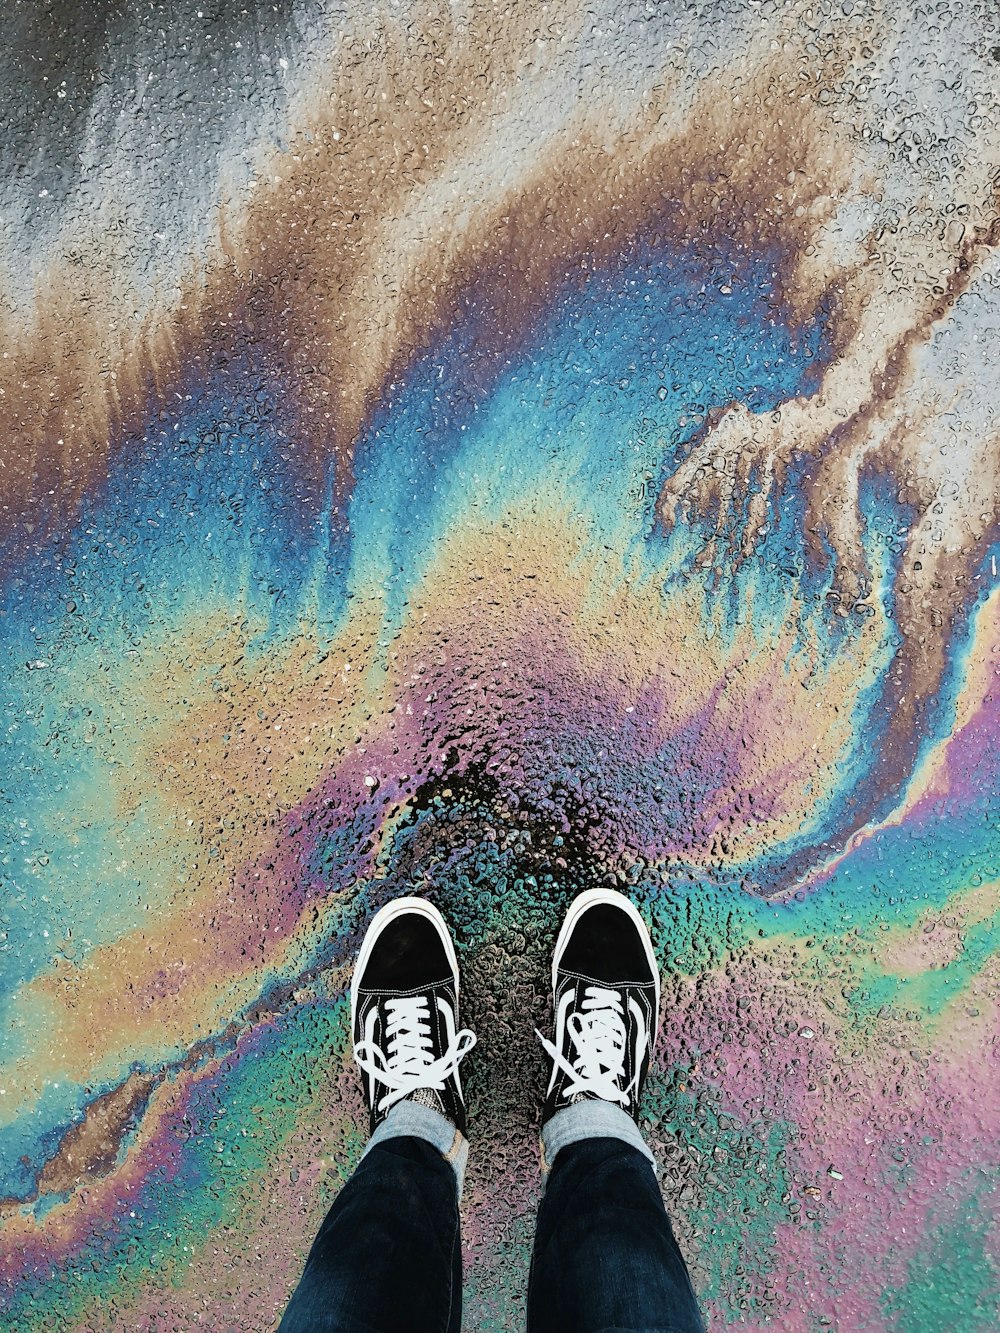 person standing on oil spilled surface